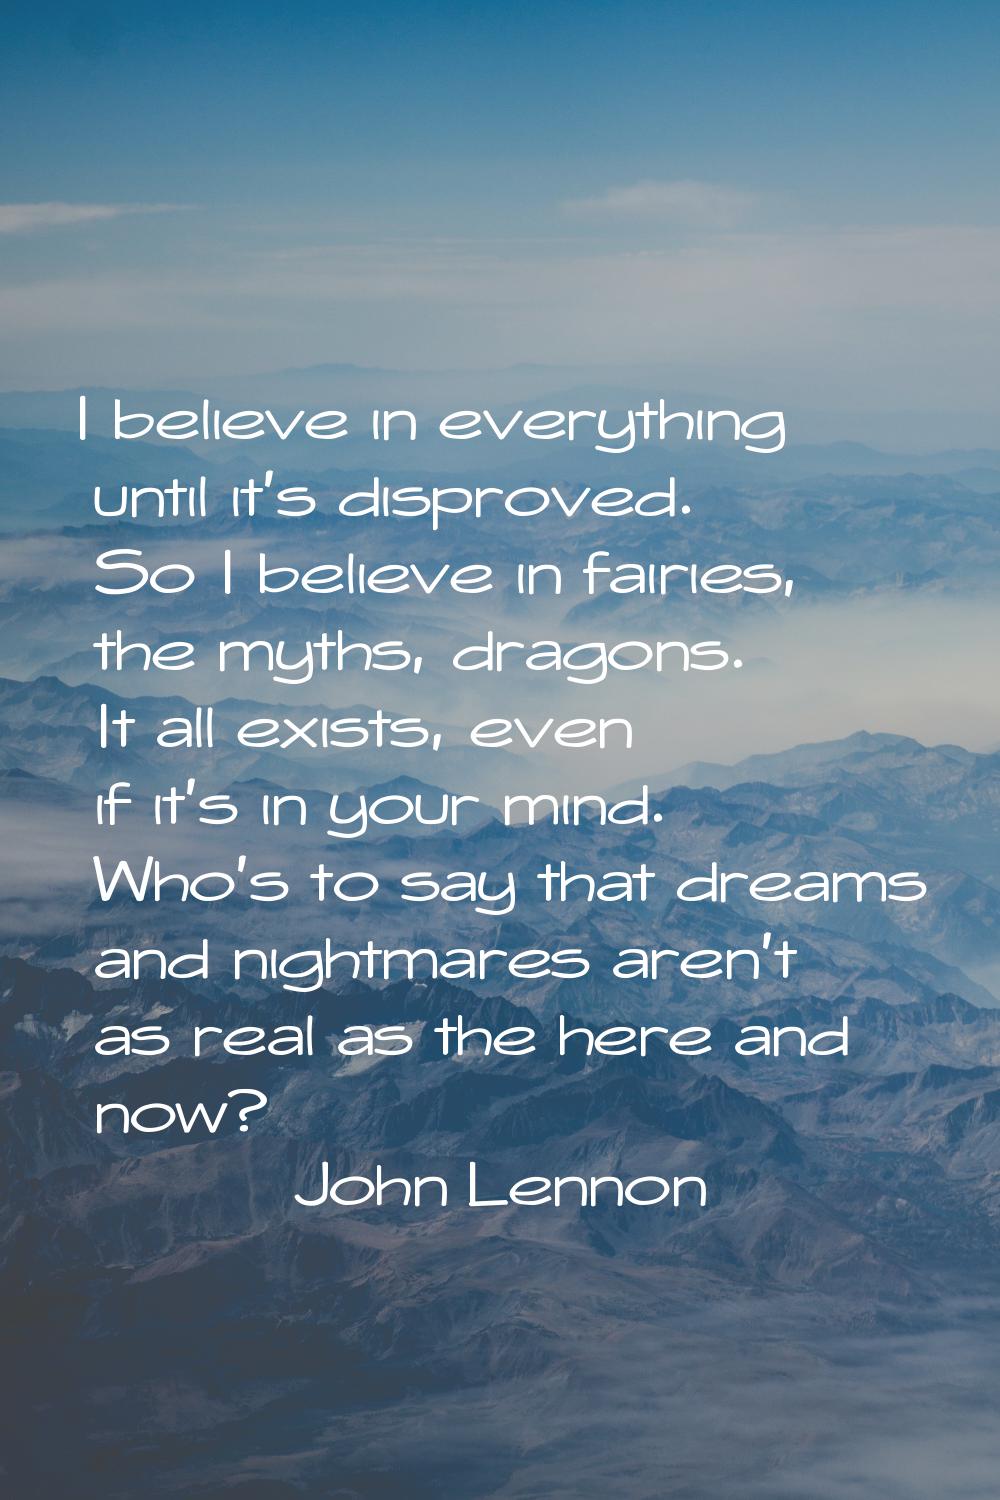 I believe in everything until it's disproved. So I believe in fairies, the myths, dragons. It all e